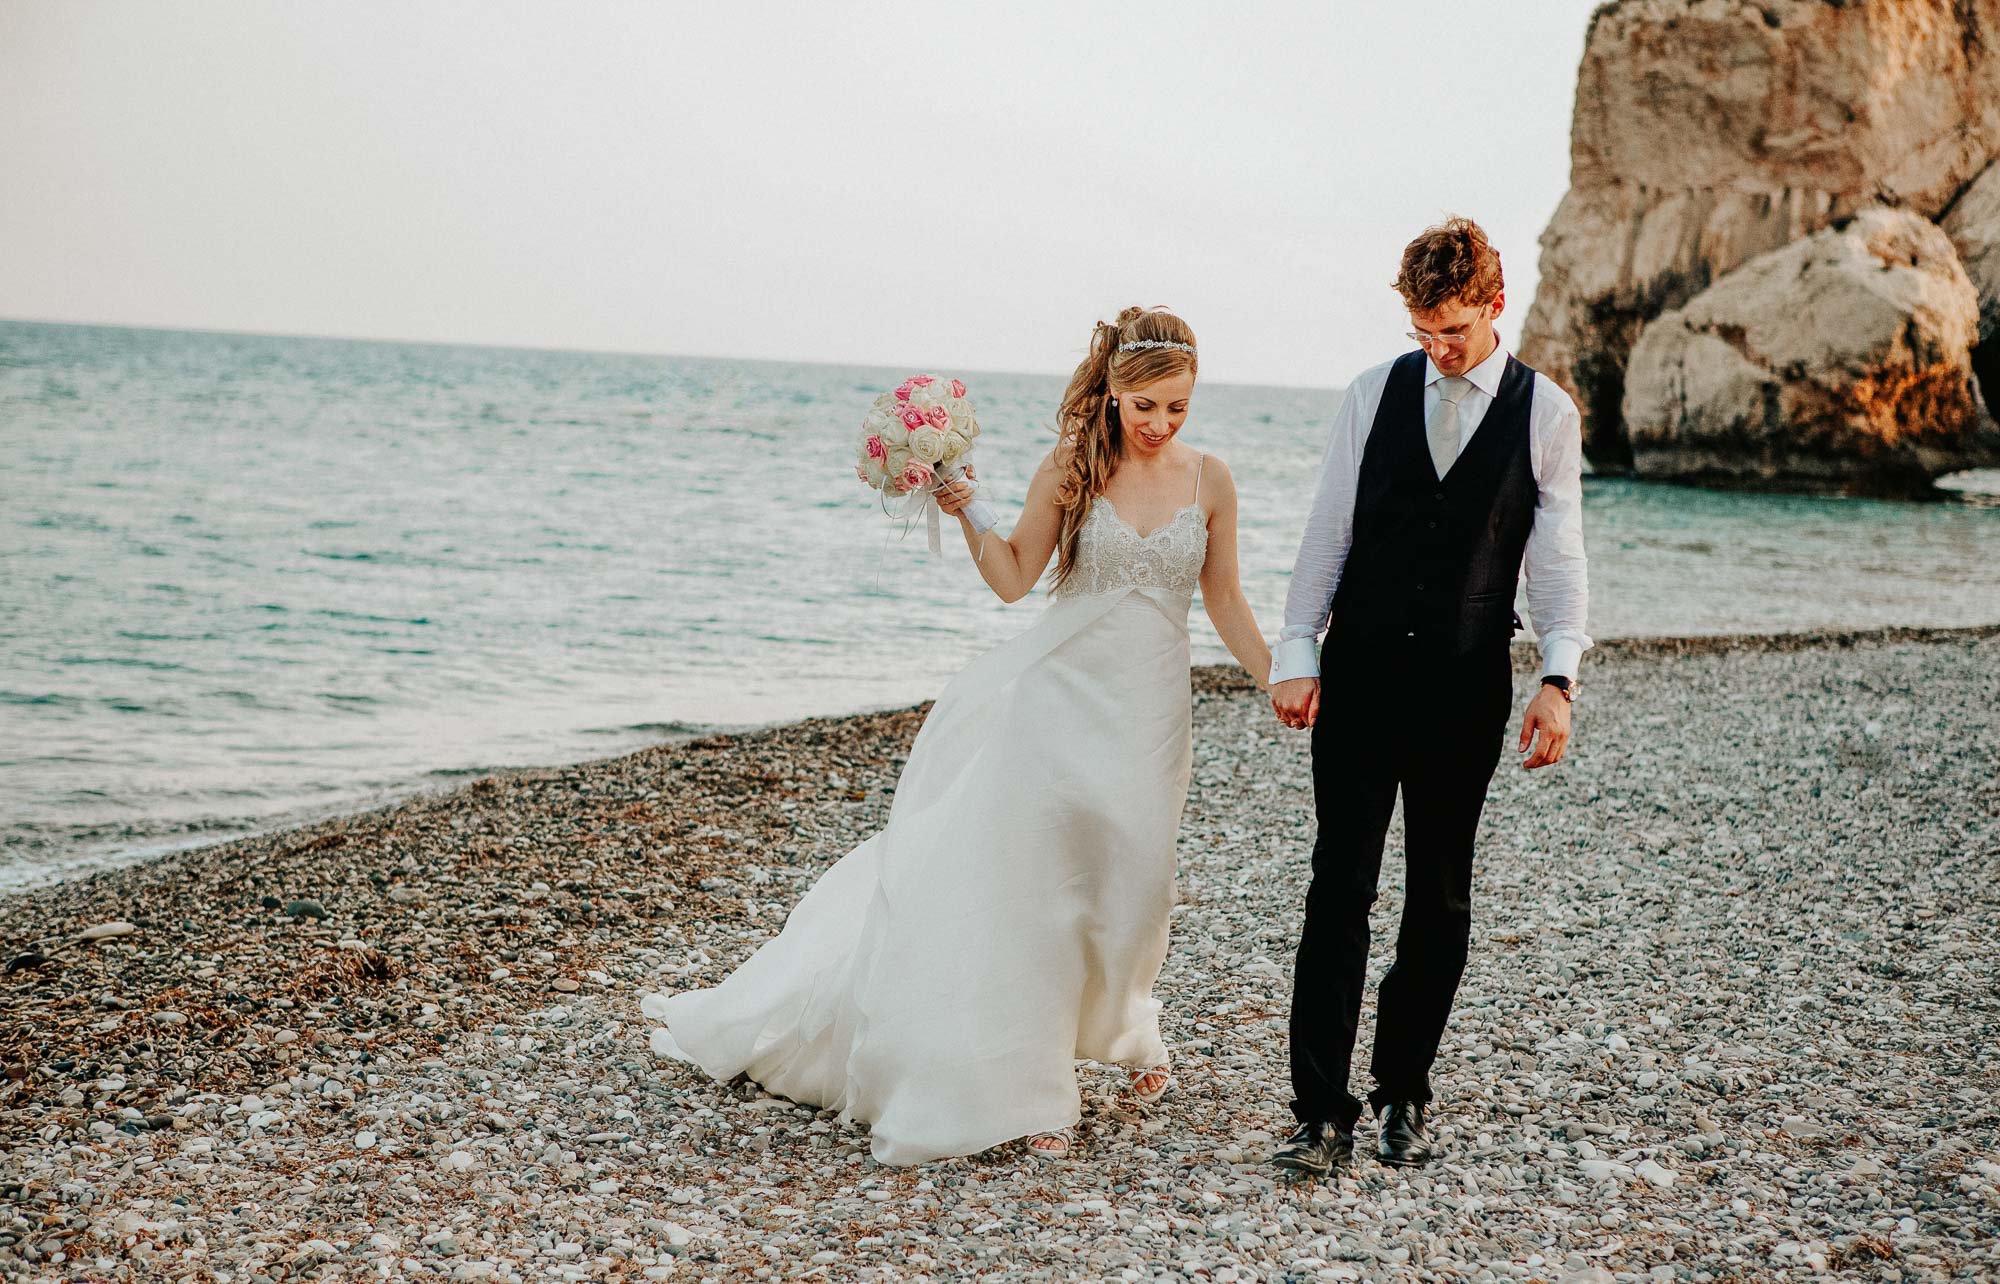 Married couple walking hand in hand by Aphrodites Rock (Petra tou Romiou) Cyprus.